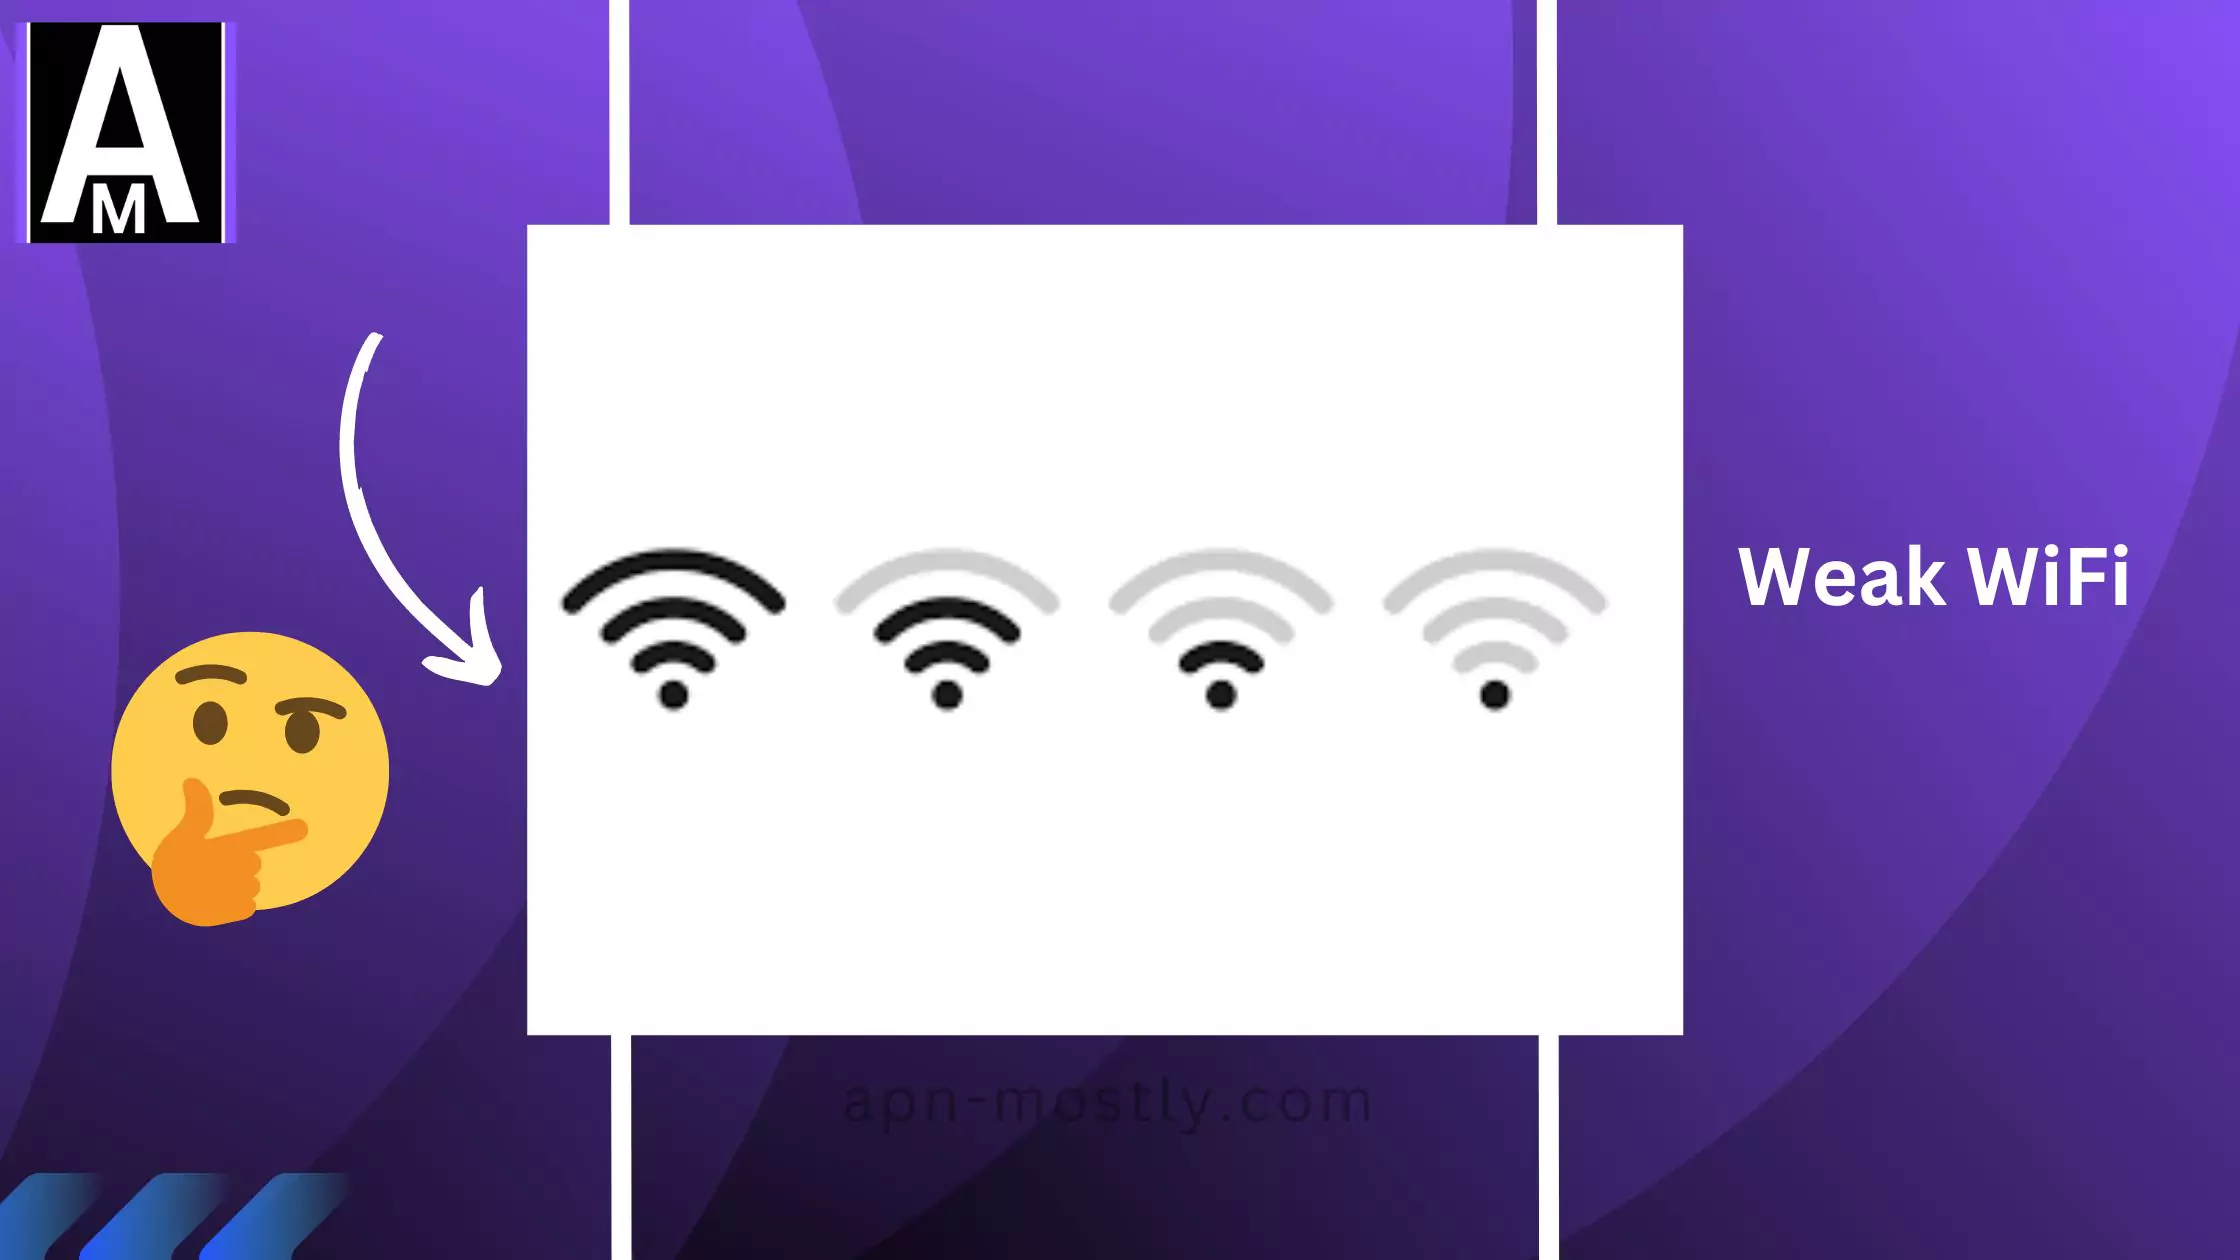 image of different wifi signals from strong to weak